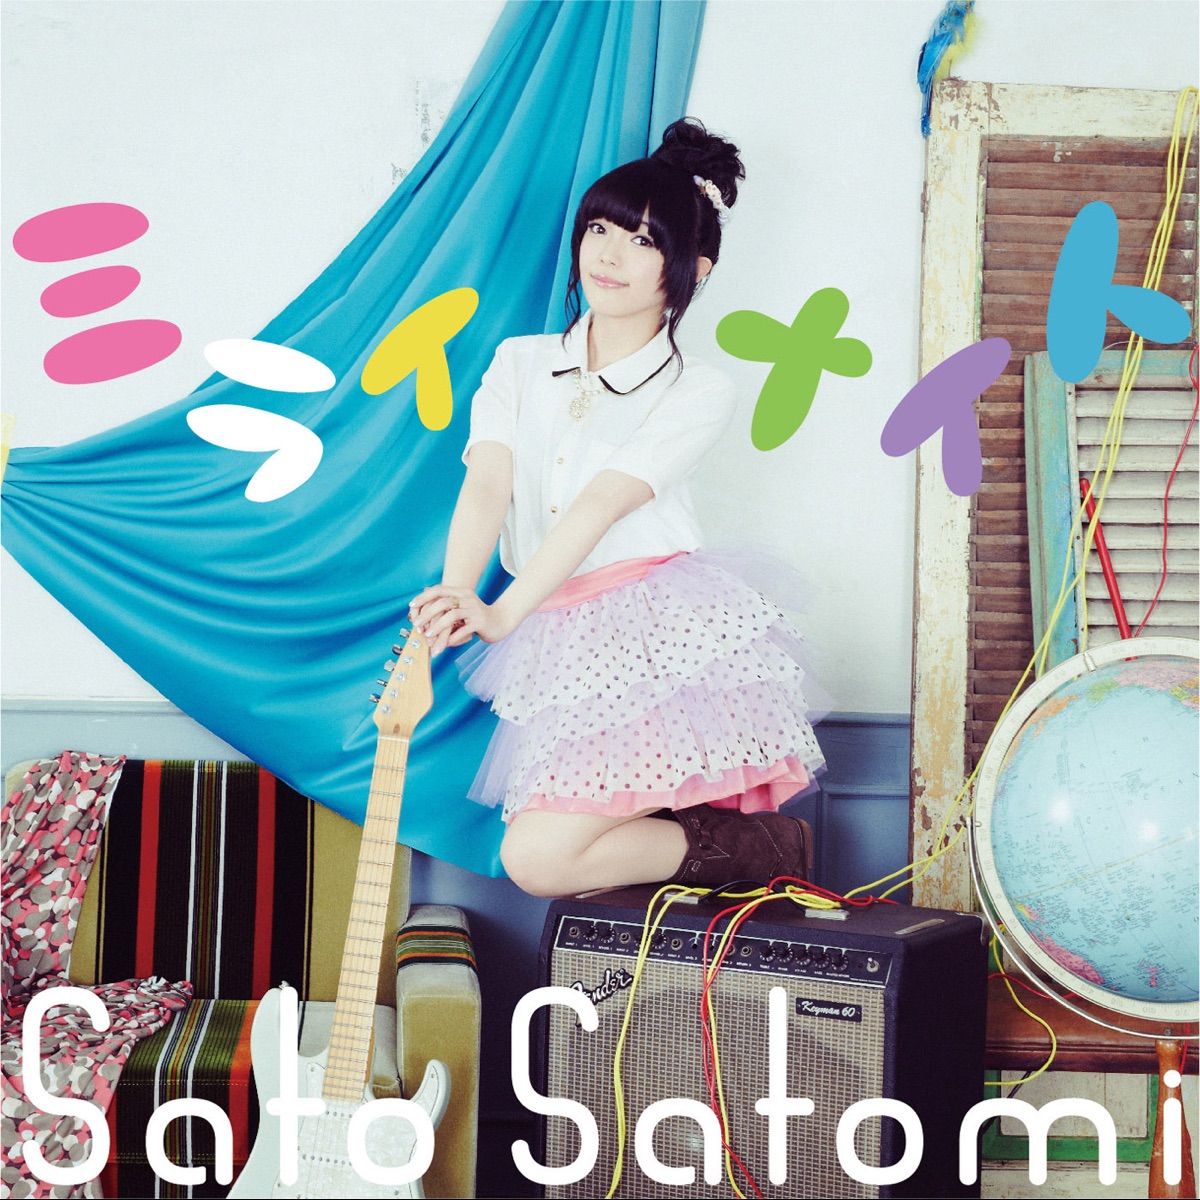 Cover art for『Satomi Sato - ミライナイト』from the release『Mirai Night